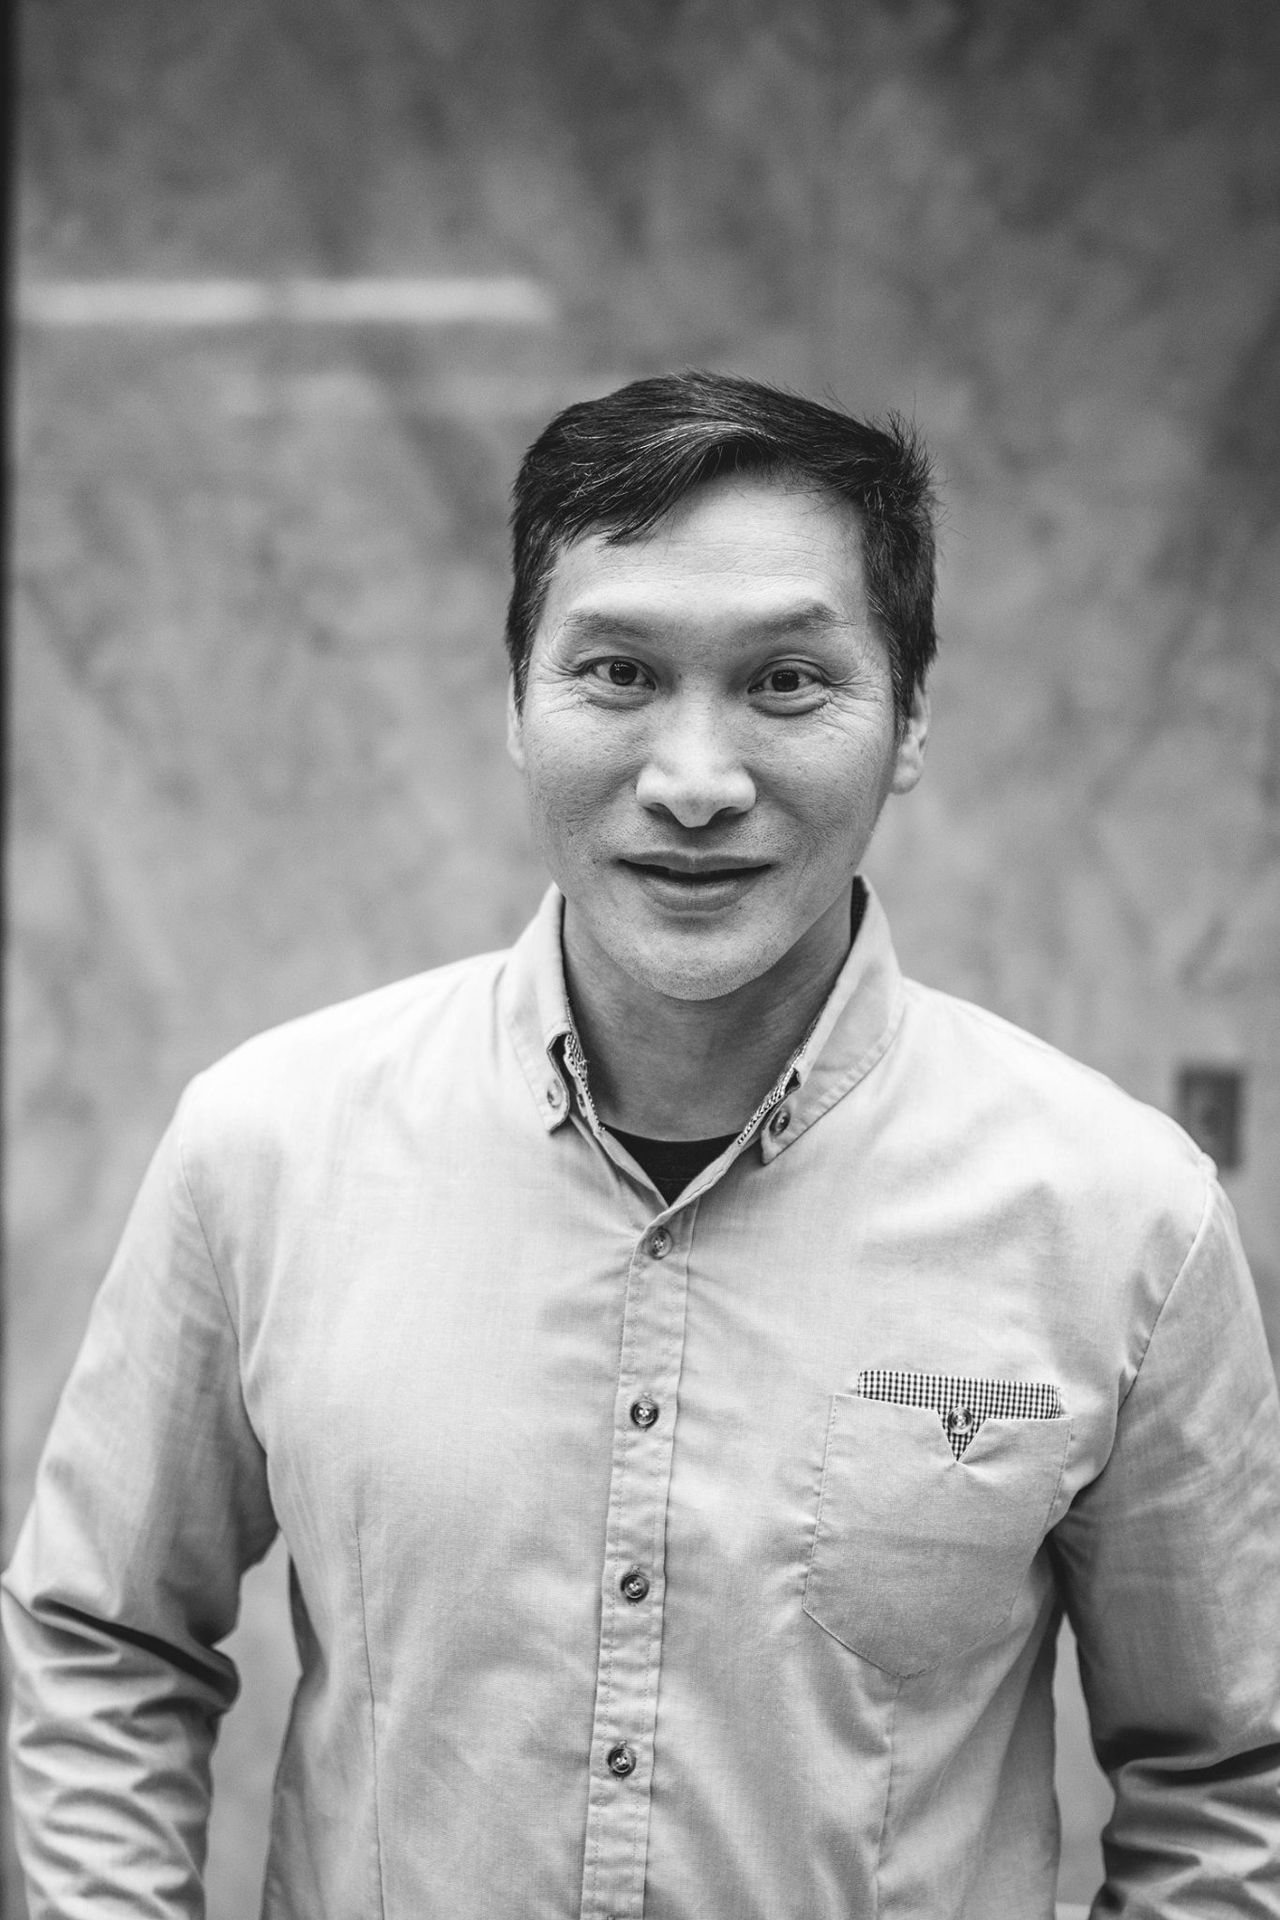 ROOTS co-founder Eddy Zheng.